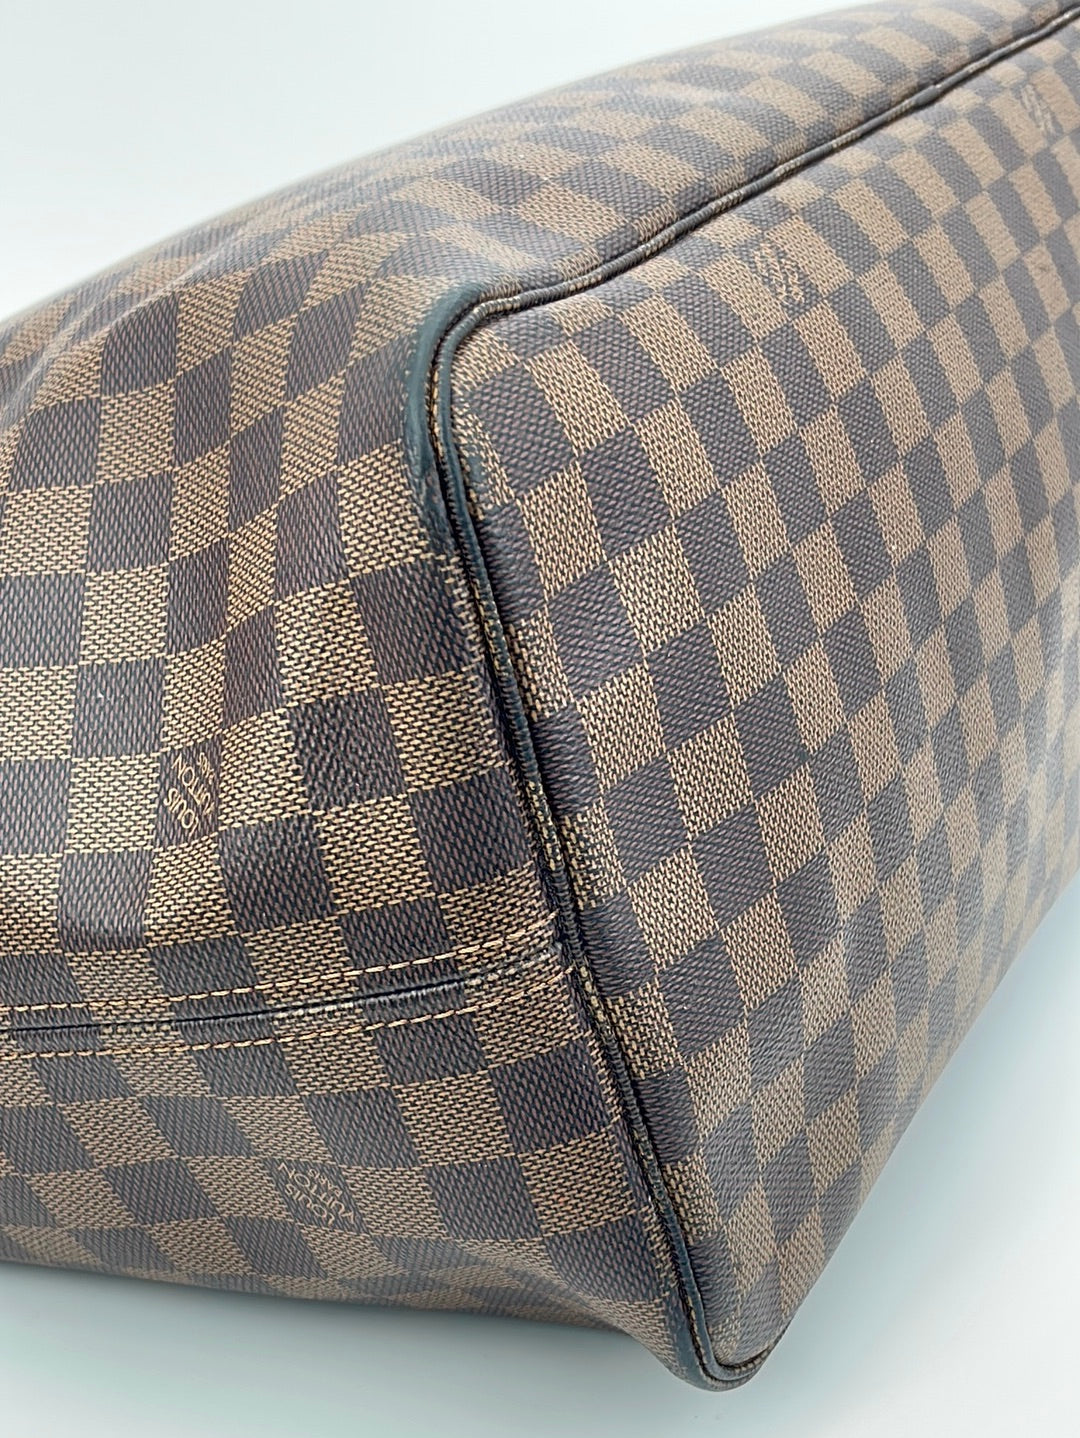 Louis Vuitton Neverfull GM Tote in Damier Ebene Canvas